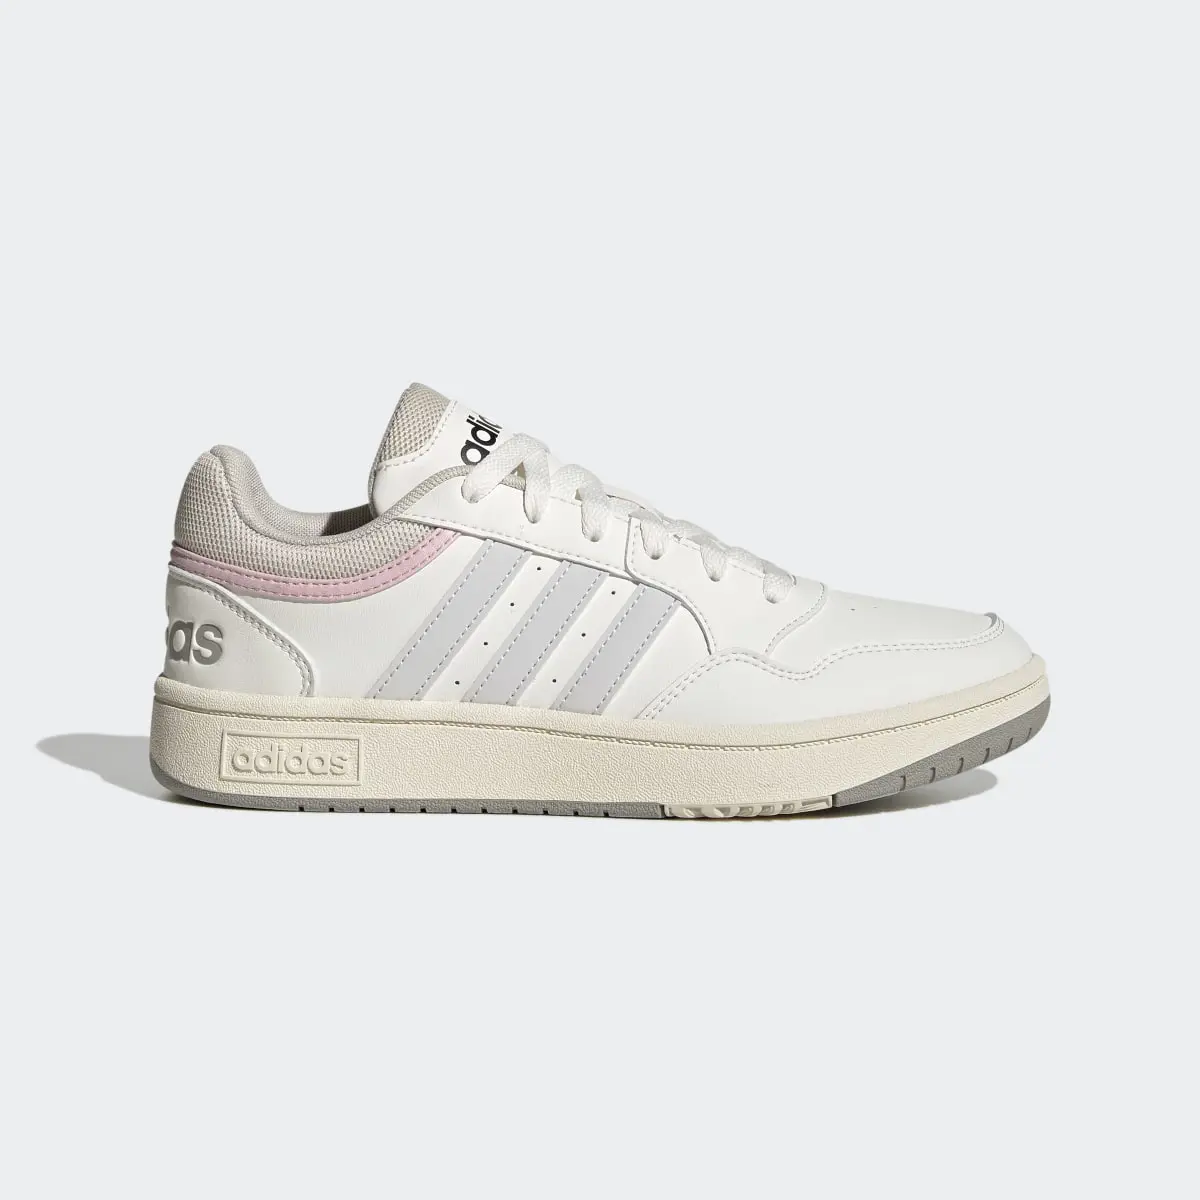 Adidas Hoops 3.0 Mid Lifestyle Basketball Low Shoes. 2